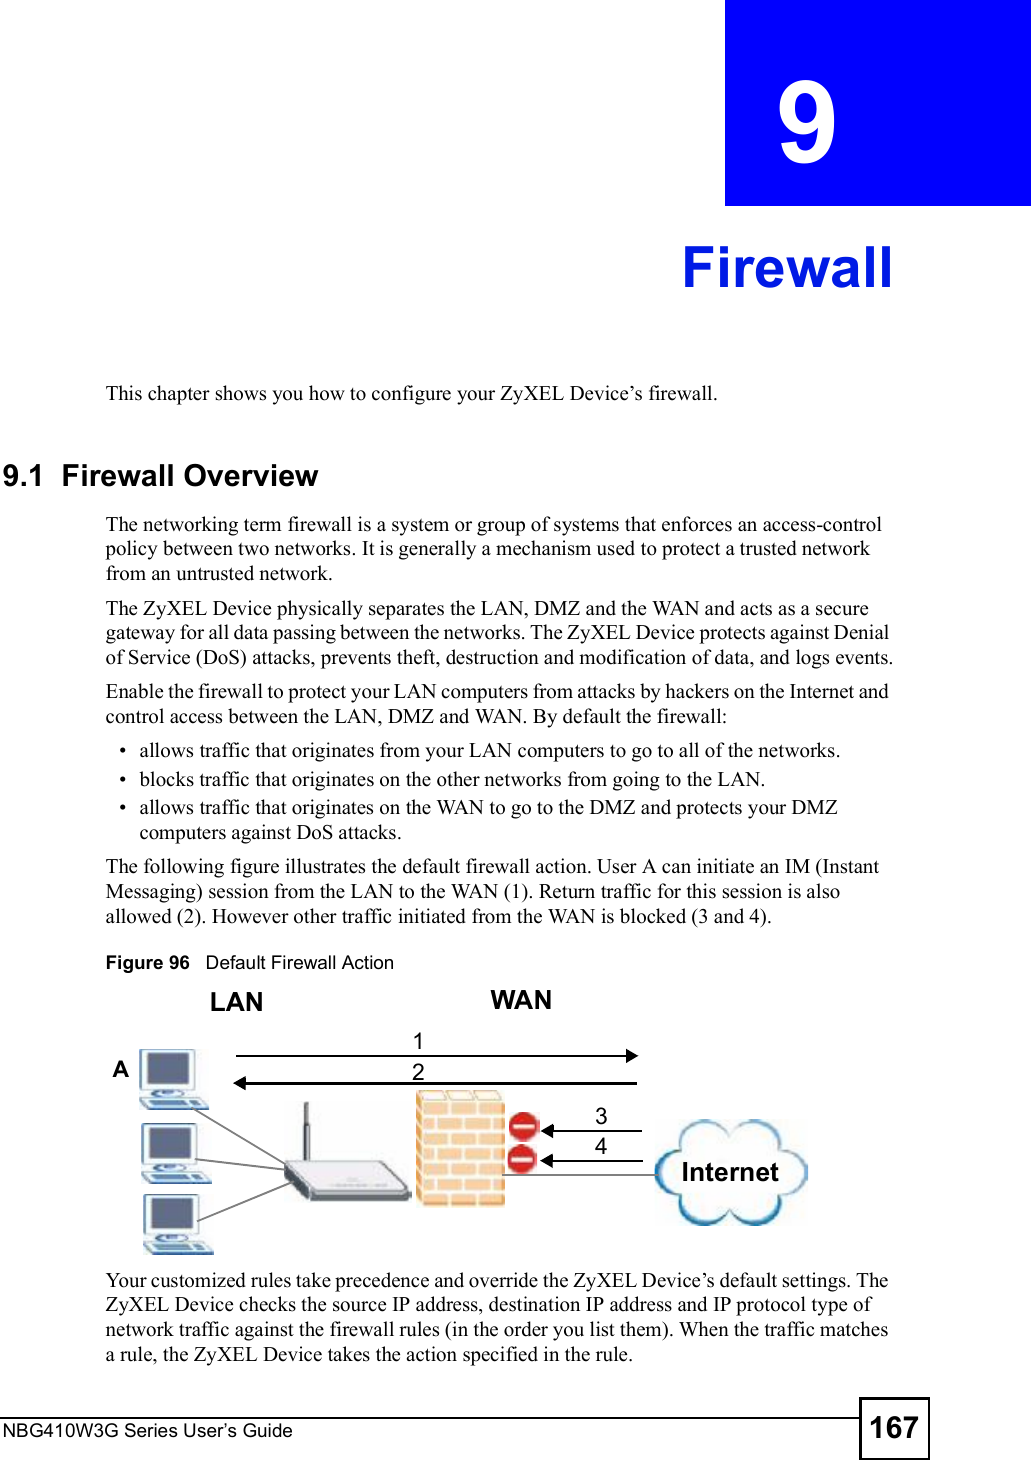 NBG410W3G Series User s Guide 167CHAPTER  9 FirewallThis chapter shows you how to configure your ZyXEL Device!s firewall.9.1  Firewall Overview The networking term firewall is a system or group of systems that enforces an access-control policy between two networks. It is generally a mechanism used to protect a trusted network from an untrusted network. The ZyXEL Device physically separates the LAN, DMZ and the WAN and acts as a secure gateway for all data passing between the networks. The ZyXEL Device protects against Denial of Service (DoS) attacks, prevents theft, destruction and modification of data, and logs events.Enable the firewall to protect your LAN computers from attacks by hackers on the Internet and control access between the LAN, DMZ and WAN. By default the firewall: allows traffic that originates from your LAN computers to go to all of the networks.  blocks traffic that originates on the other networks from going to the LAN.  allows traffic that originates on the WAN to go to the DMZ and protects your DMZ computers against DoS attacks.The following figure illustrates the default firewall action. User A can initiate an IM (Instant Messaging) session from the LAN to the WAN (1). Return traffic for this session is also allowed (2). However other traffic initiated from the WAN is blocked (3 and 4).Figure 96   Default Firewall ActionYour customized rules take precedence and override the ZyXEL Device!s default settings. The ZyXEL Device checks the source IP address, destination IP address and IP protocol type of network traffic against the firewall rules (in the order you list them). When the traffic matches a rule, the ZyXEL Device takes the action specified in the rule. WANLANInternet3412A